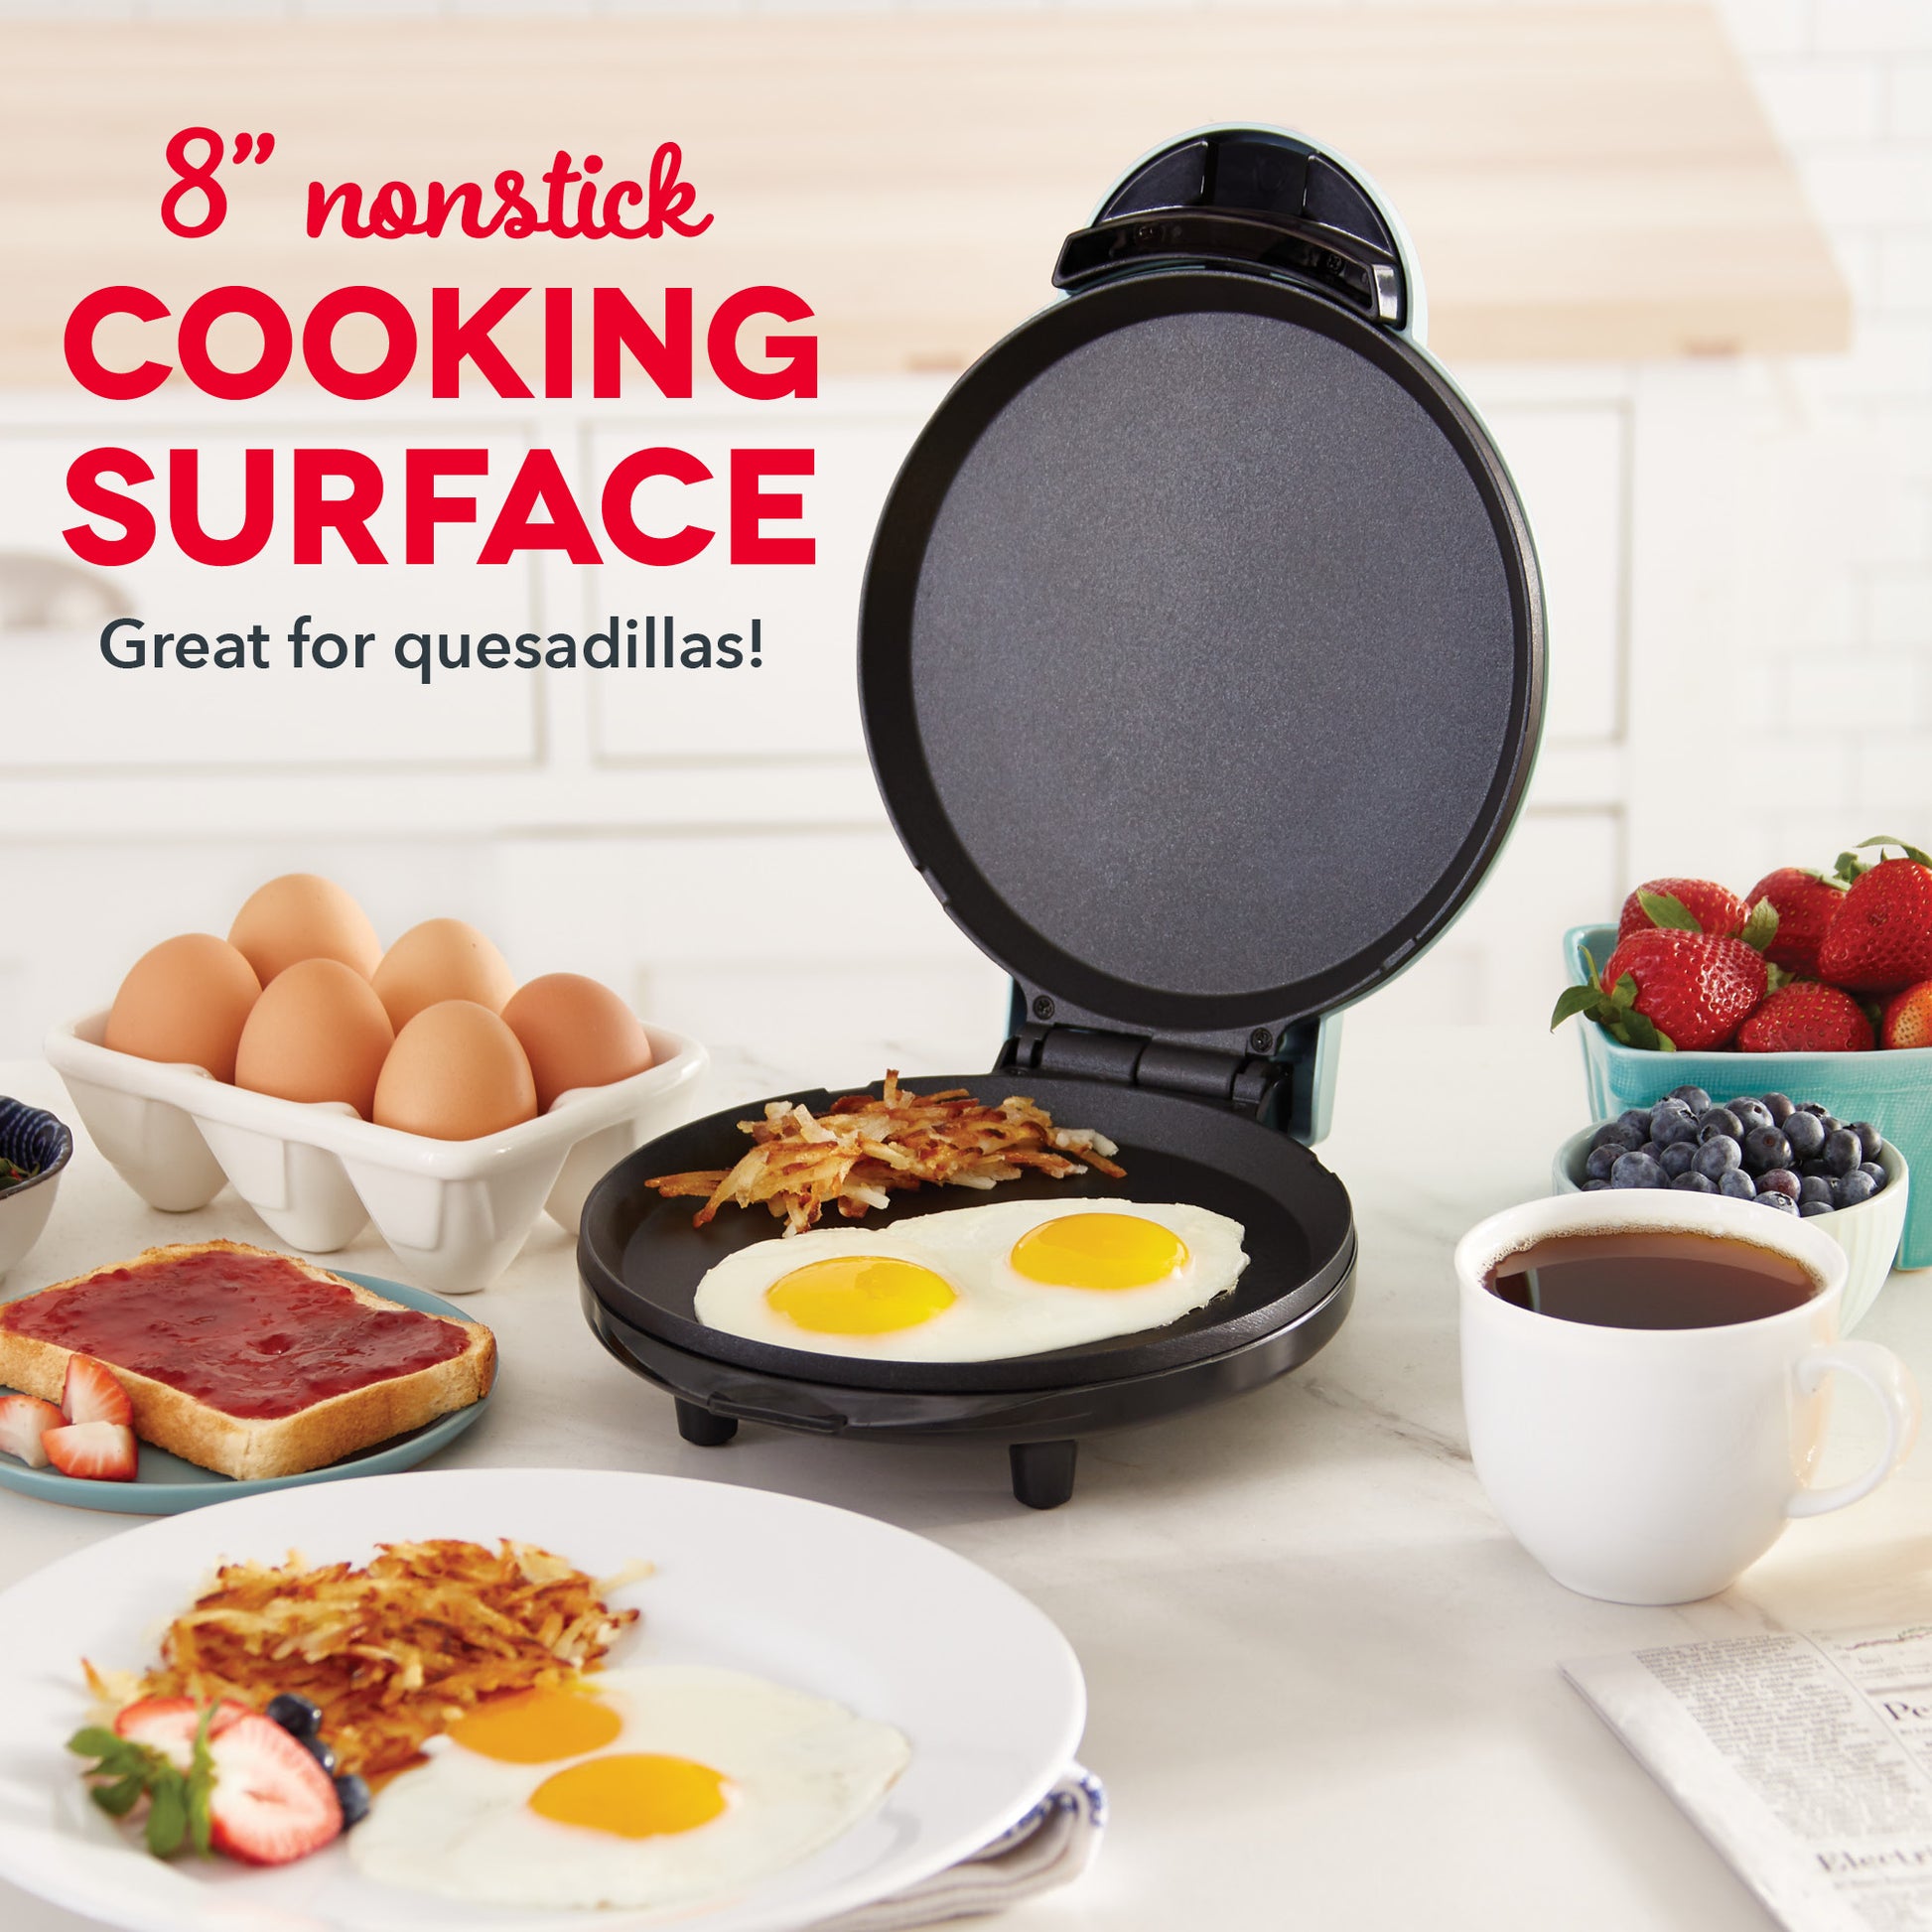 Dash Everyday Nonstick Deluxe Electric Griddle with Removable Cooking Plate for Pancakes, Burgers, Quesadillas, Eggs and Other Snacks, Includes Drip